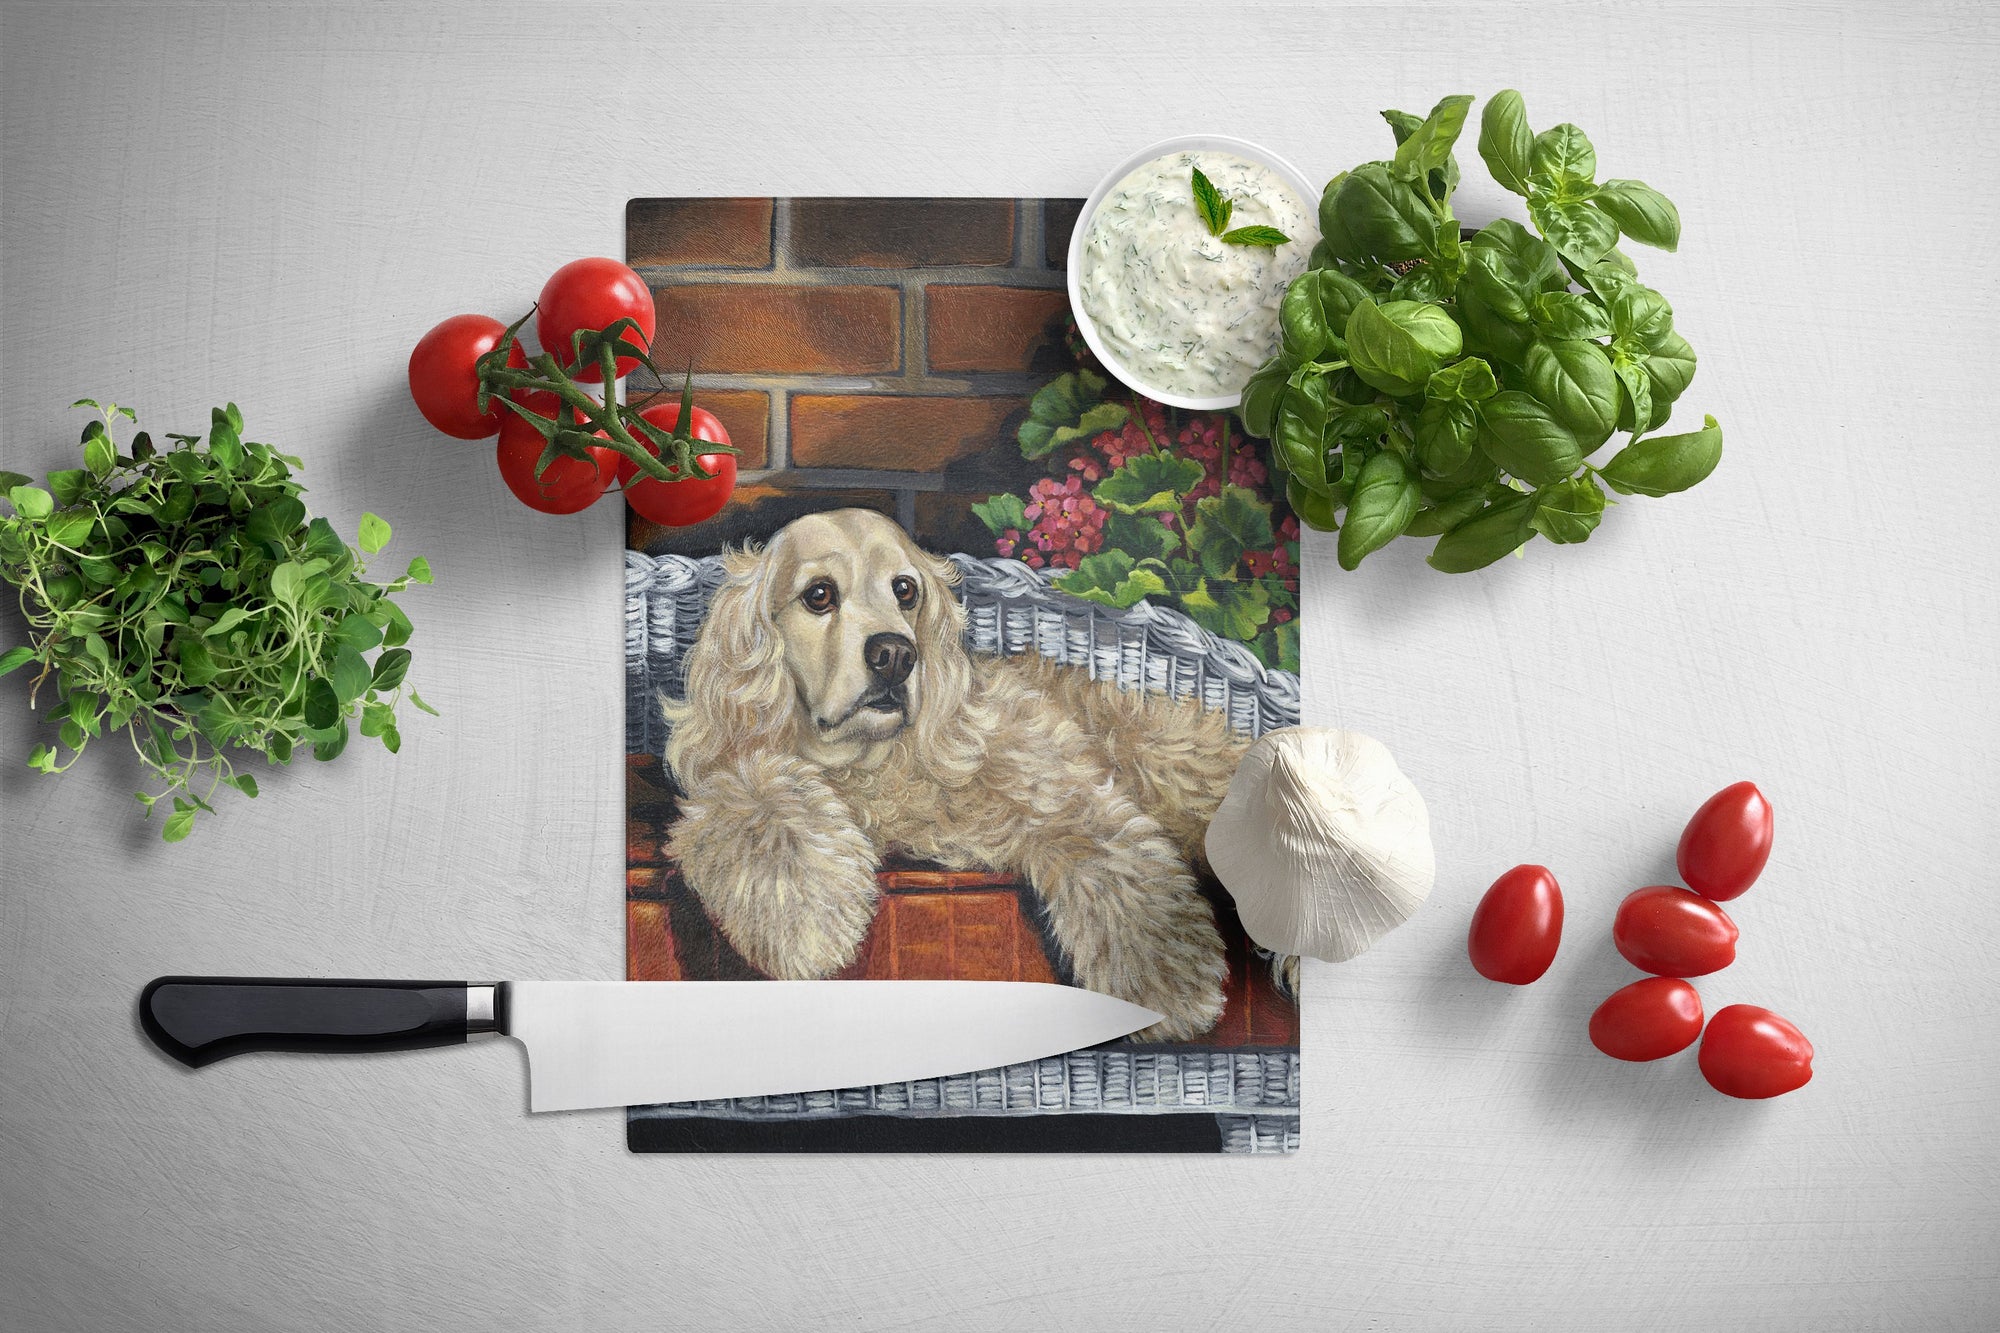 Cocker Spaniel Life is Good Glass Cutting Board Large PPP3074LCB by Caroline's Treasures